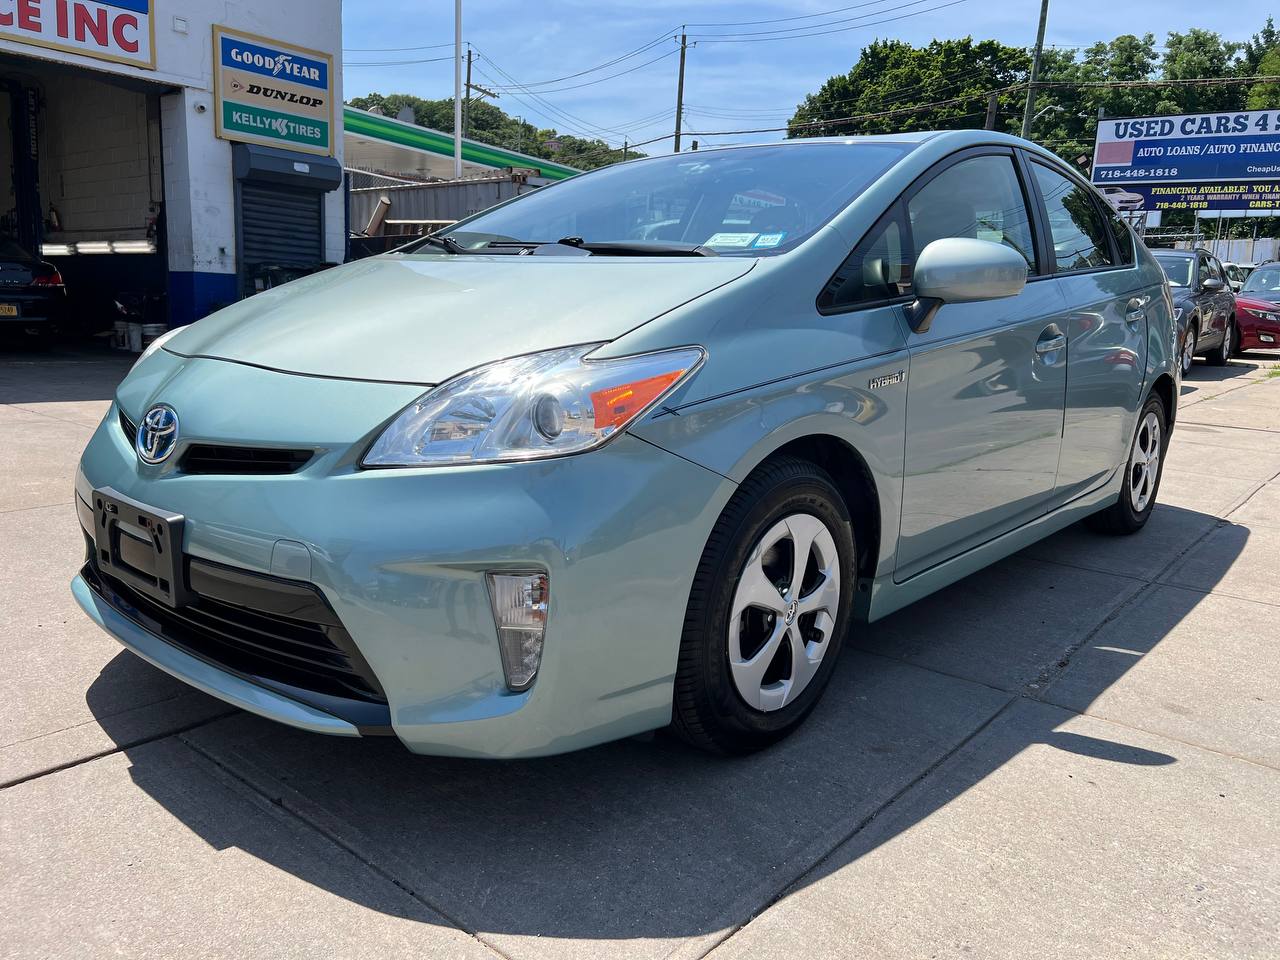 Used Car - 2014 Toyota Prius Two for Sale in Staten Island, NY